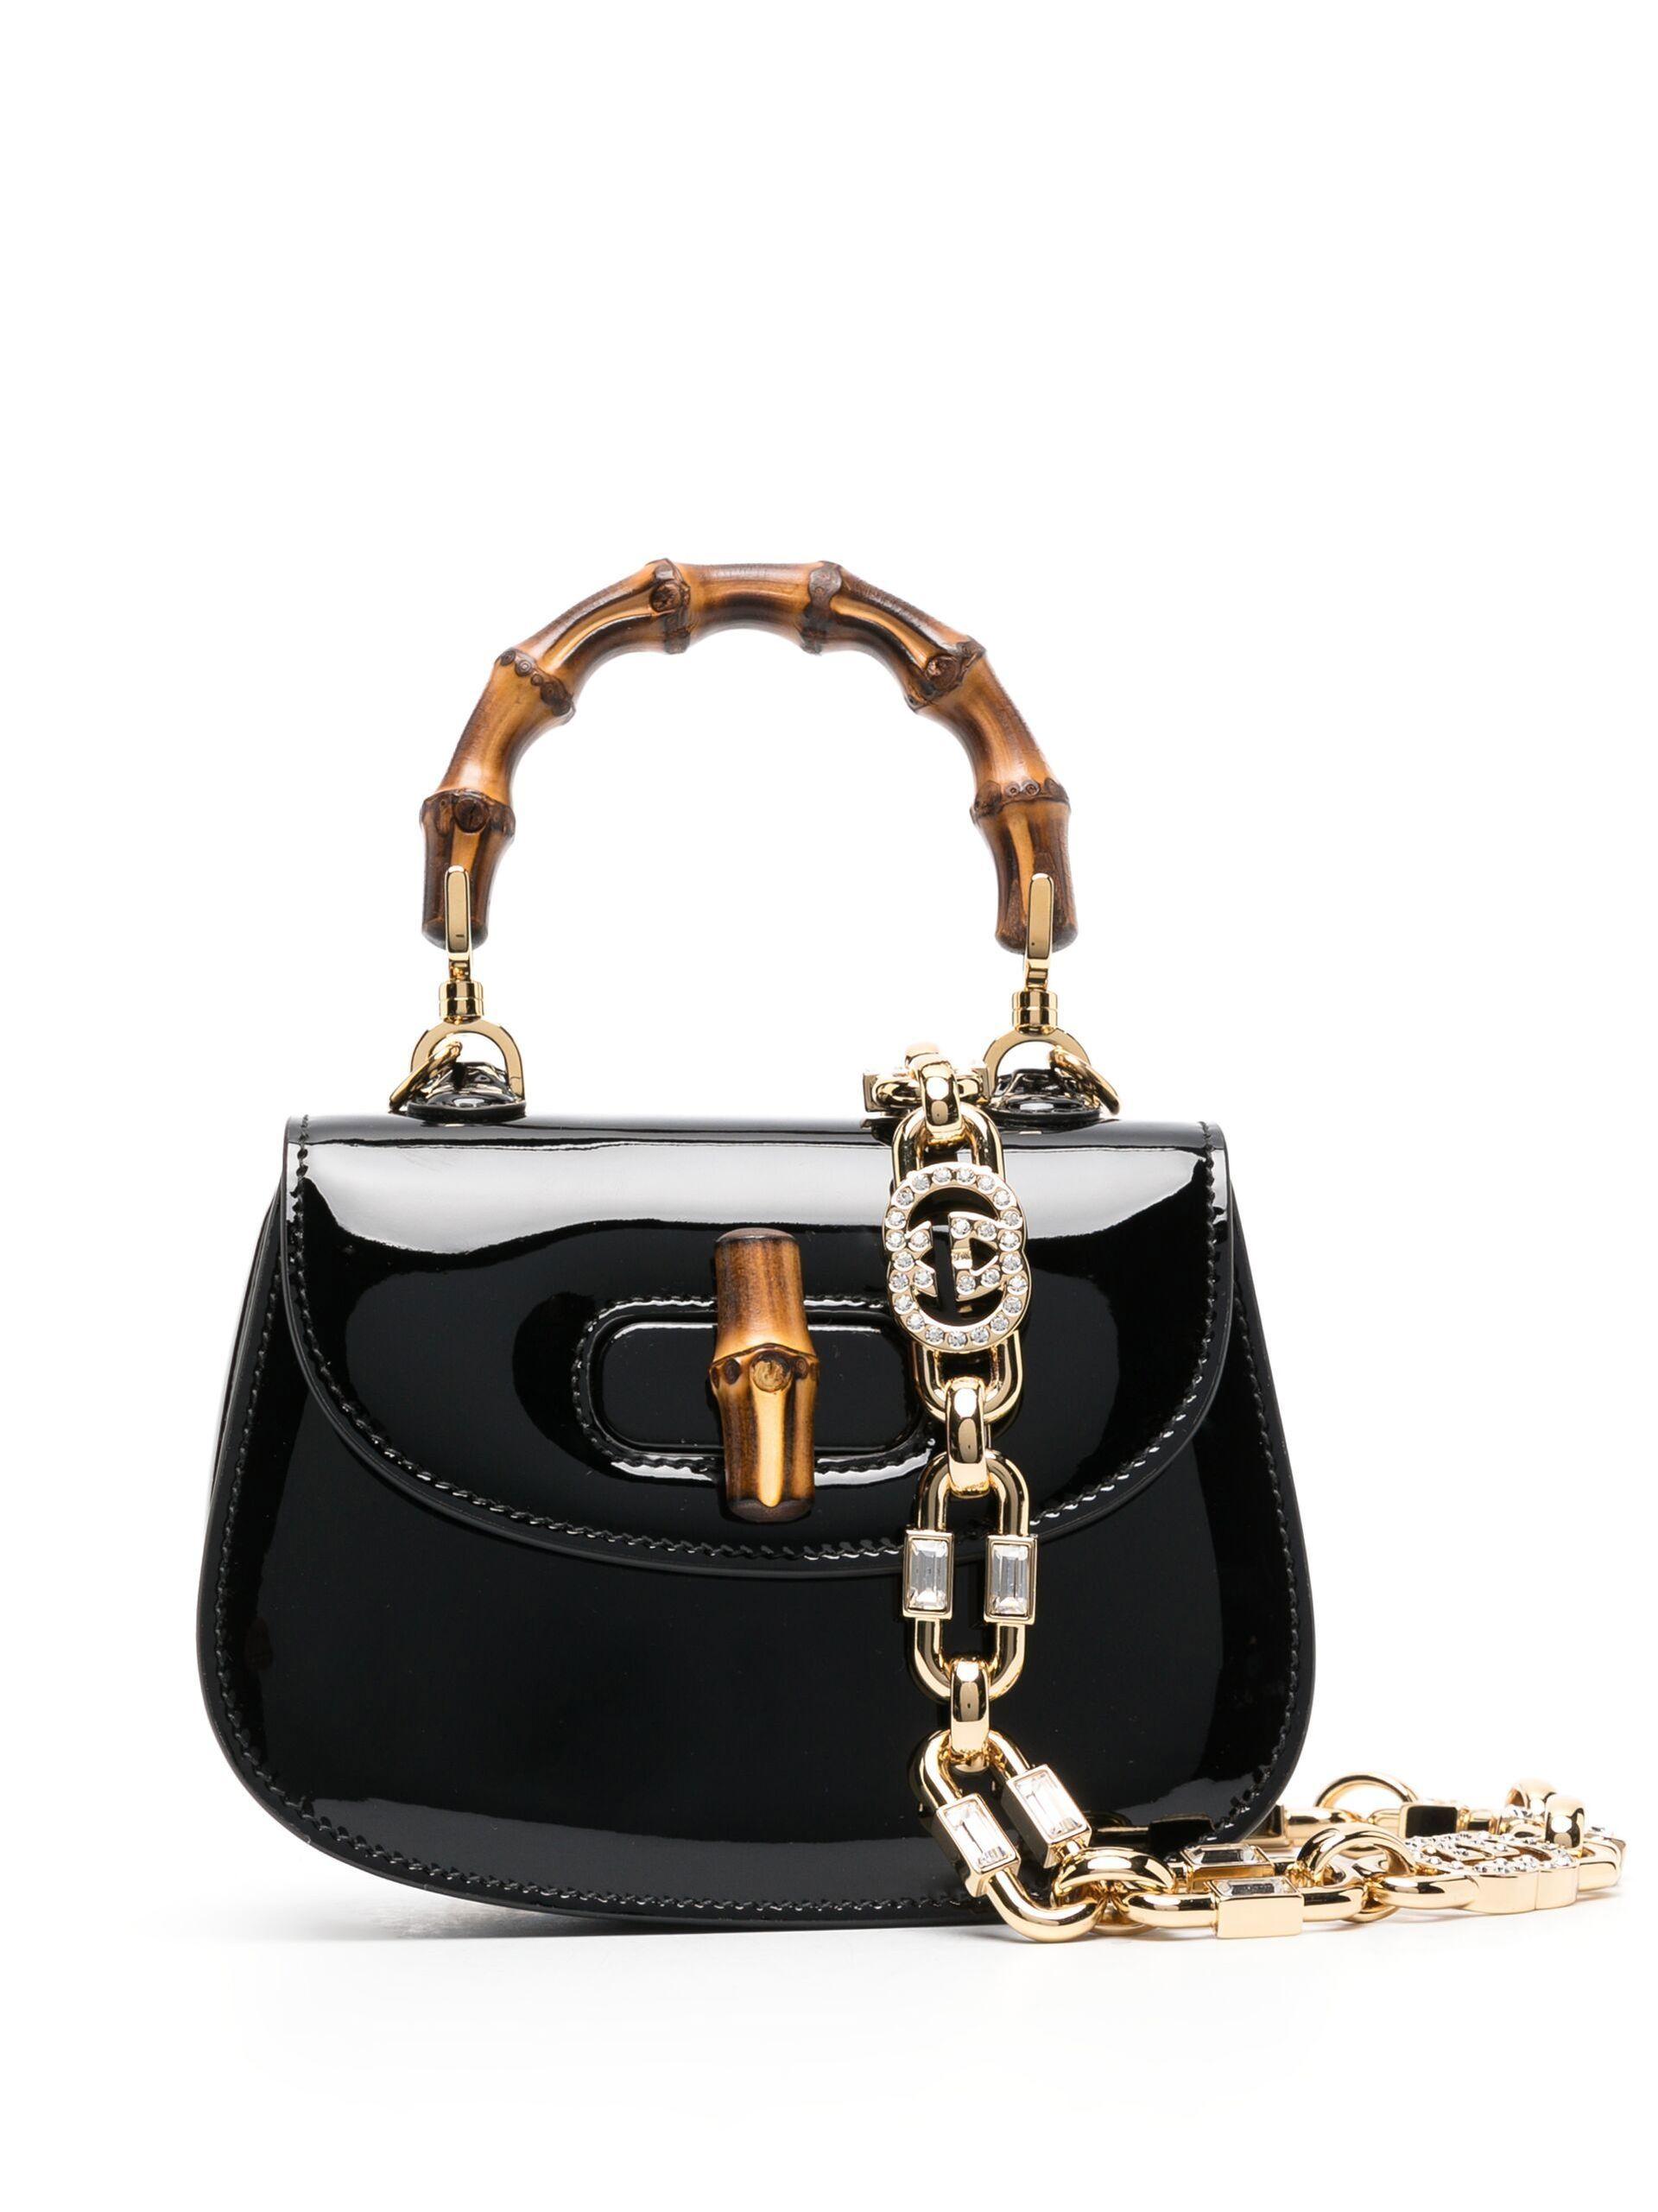 Gucci Bamboo 1947 small top handle bag in black leather